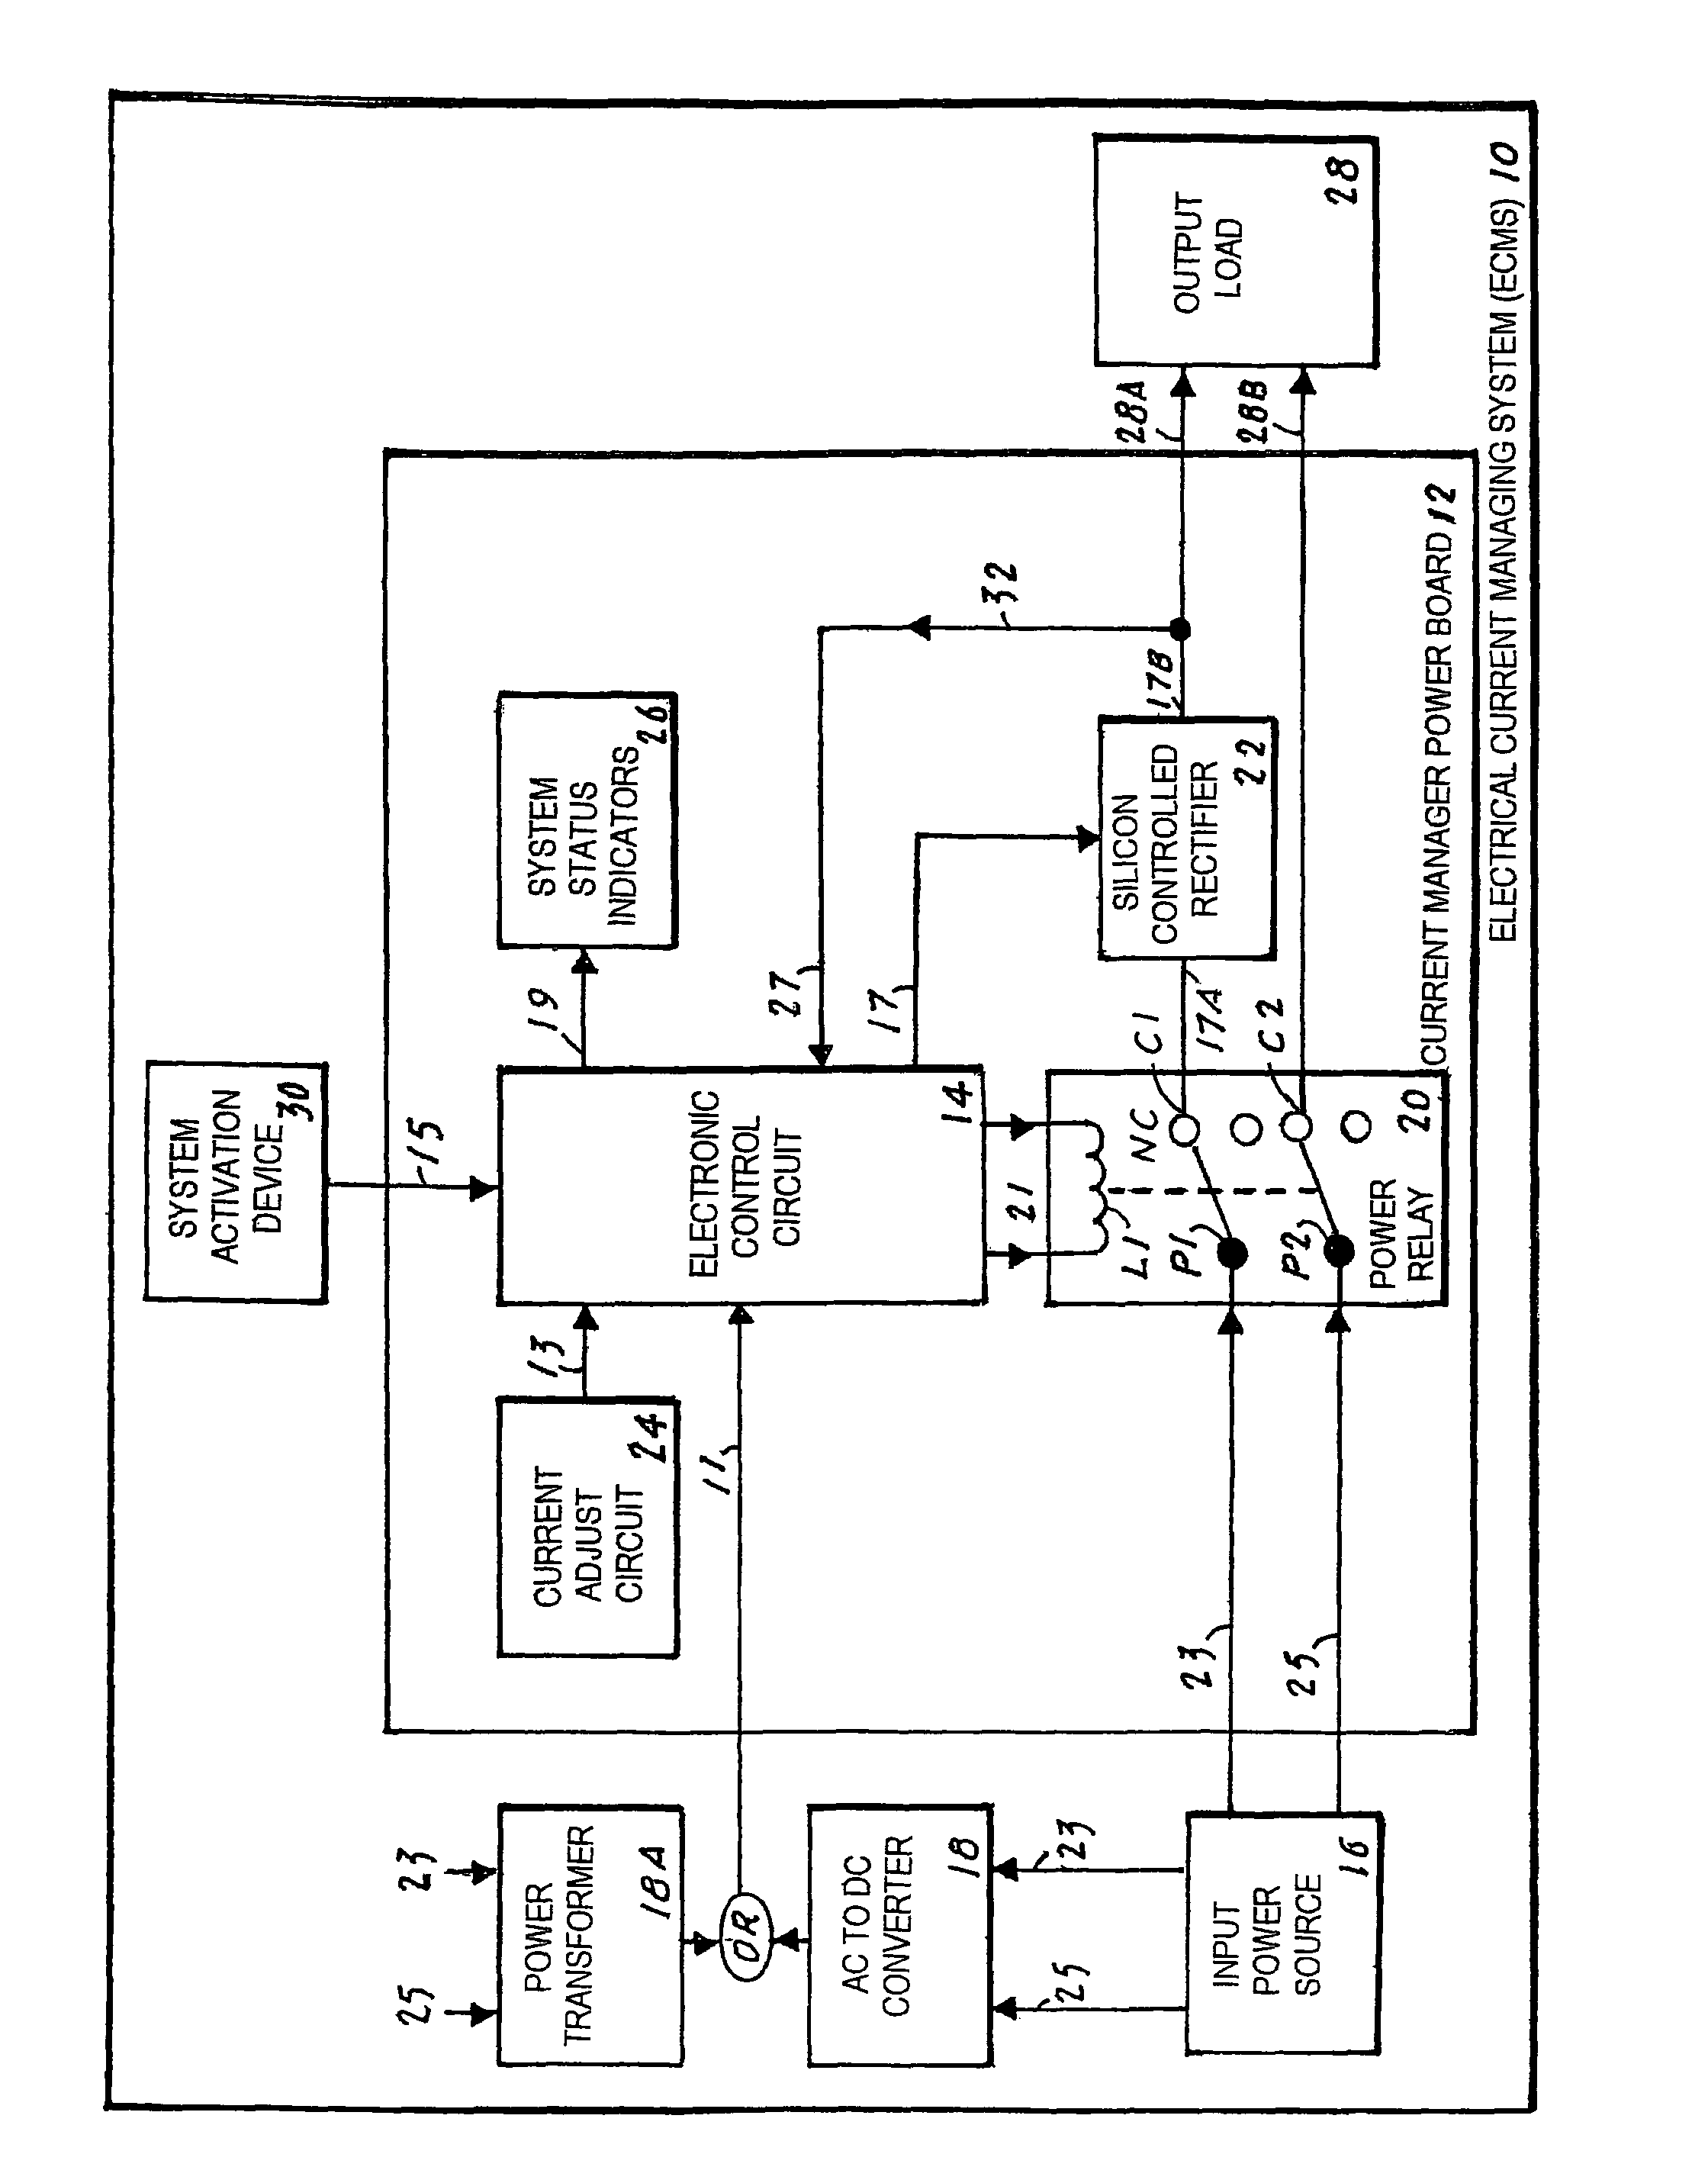 Electrical current managing system